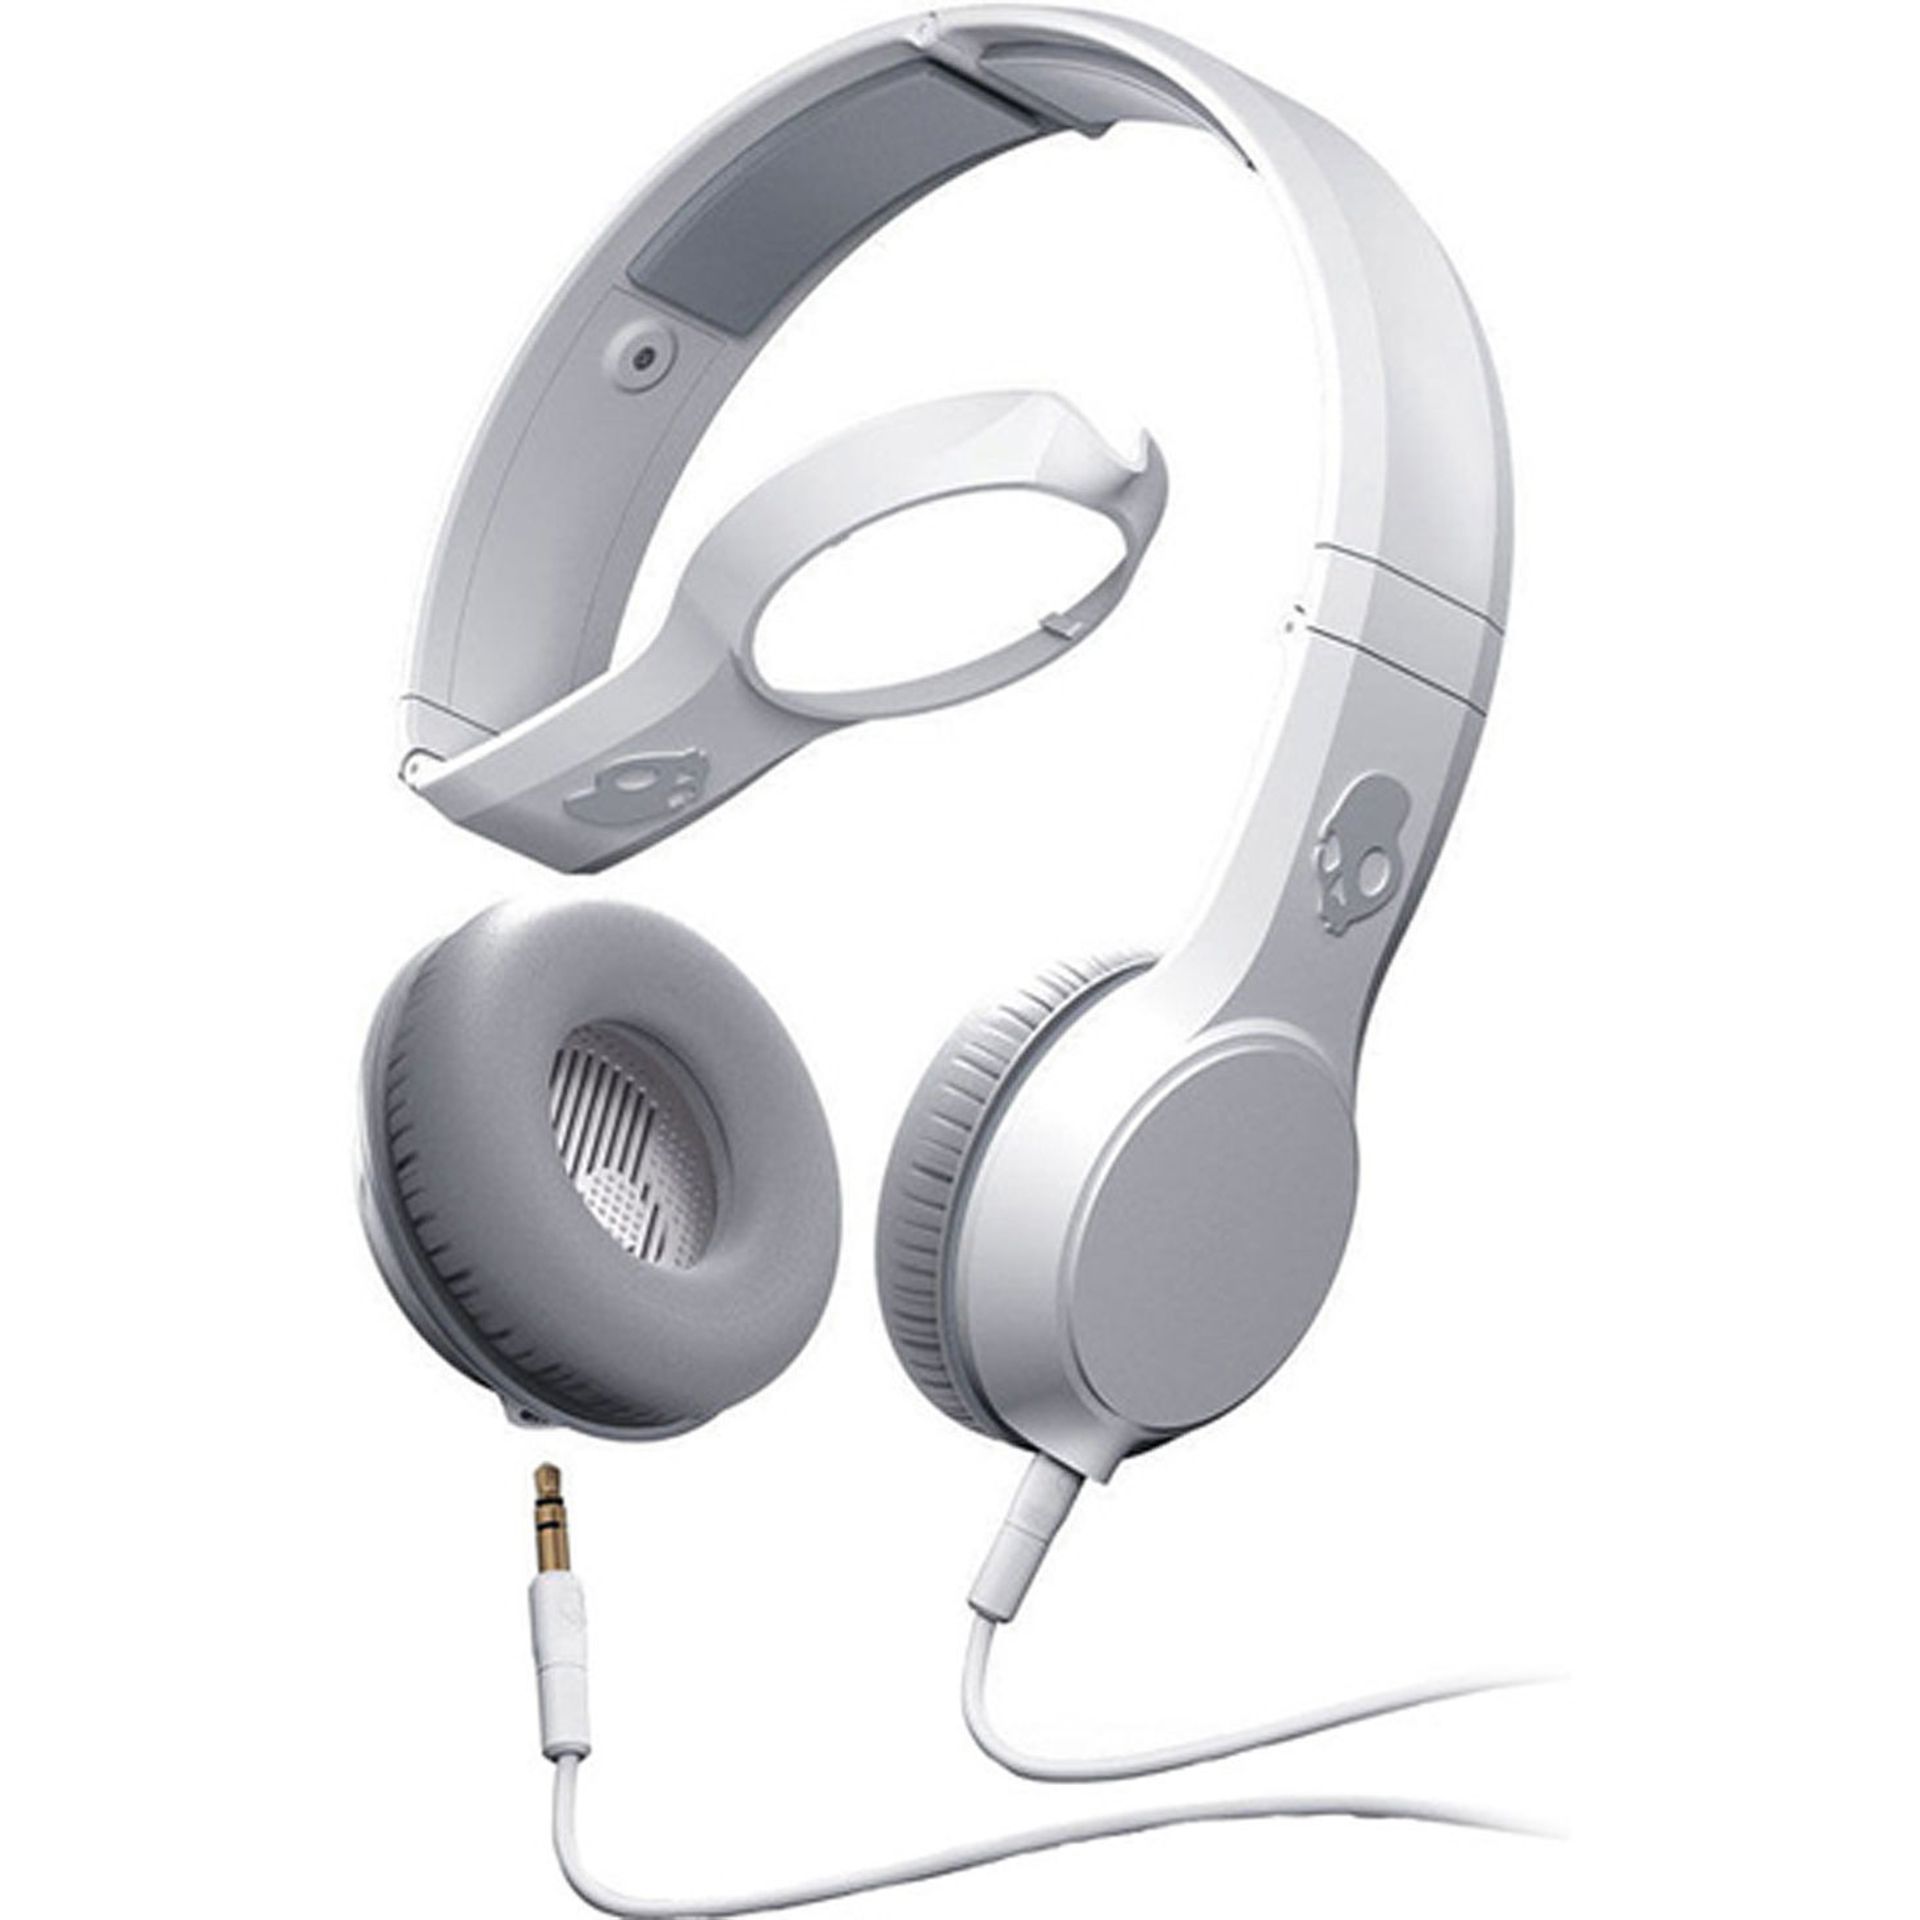 V Brand New Skullcandy Cassette Headphones - With Mic and Remote - Interchangeable Ear Pillows -